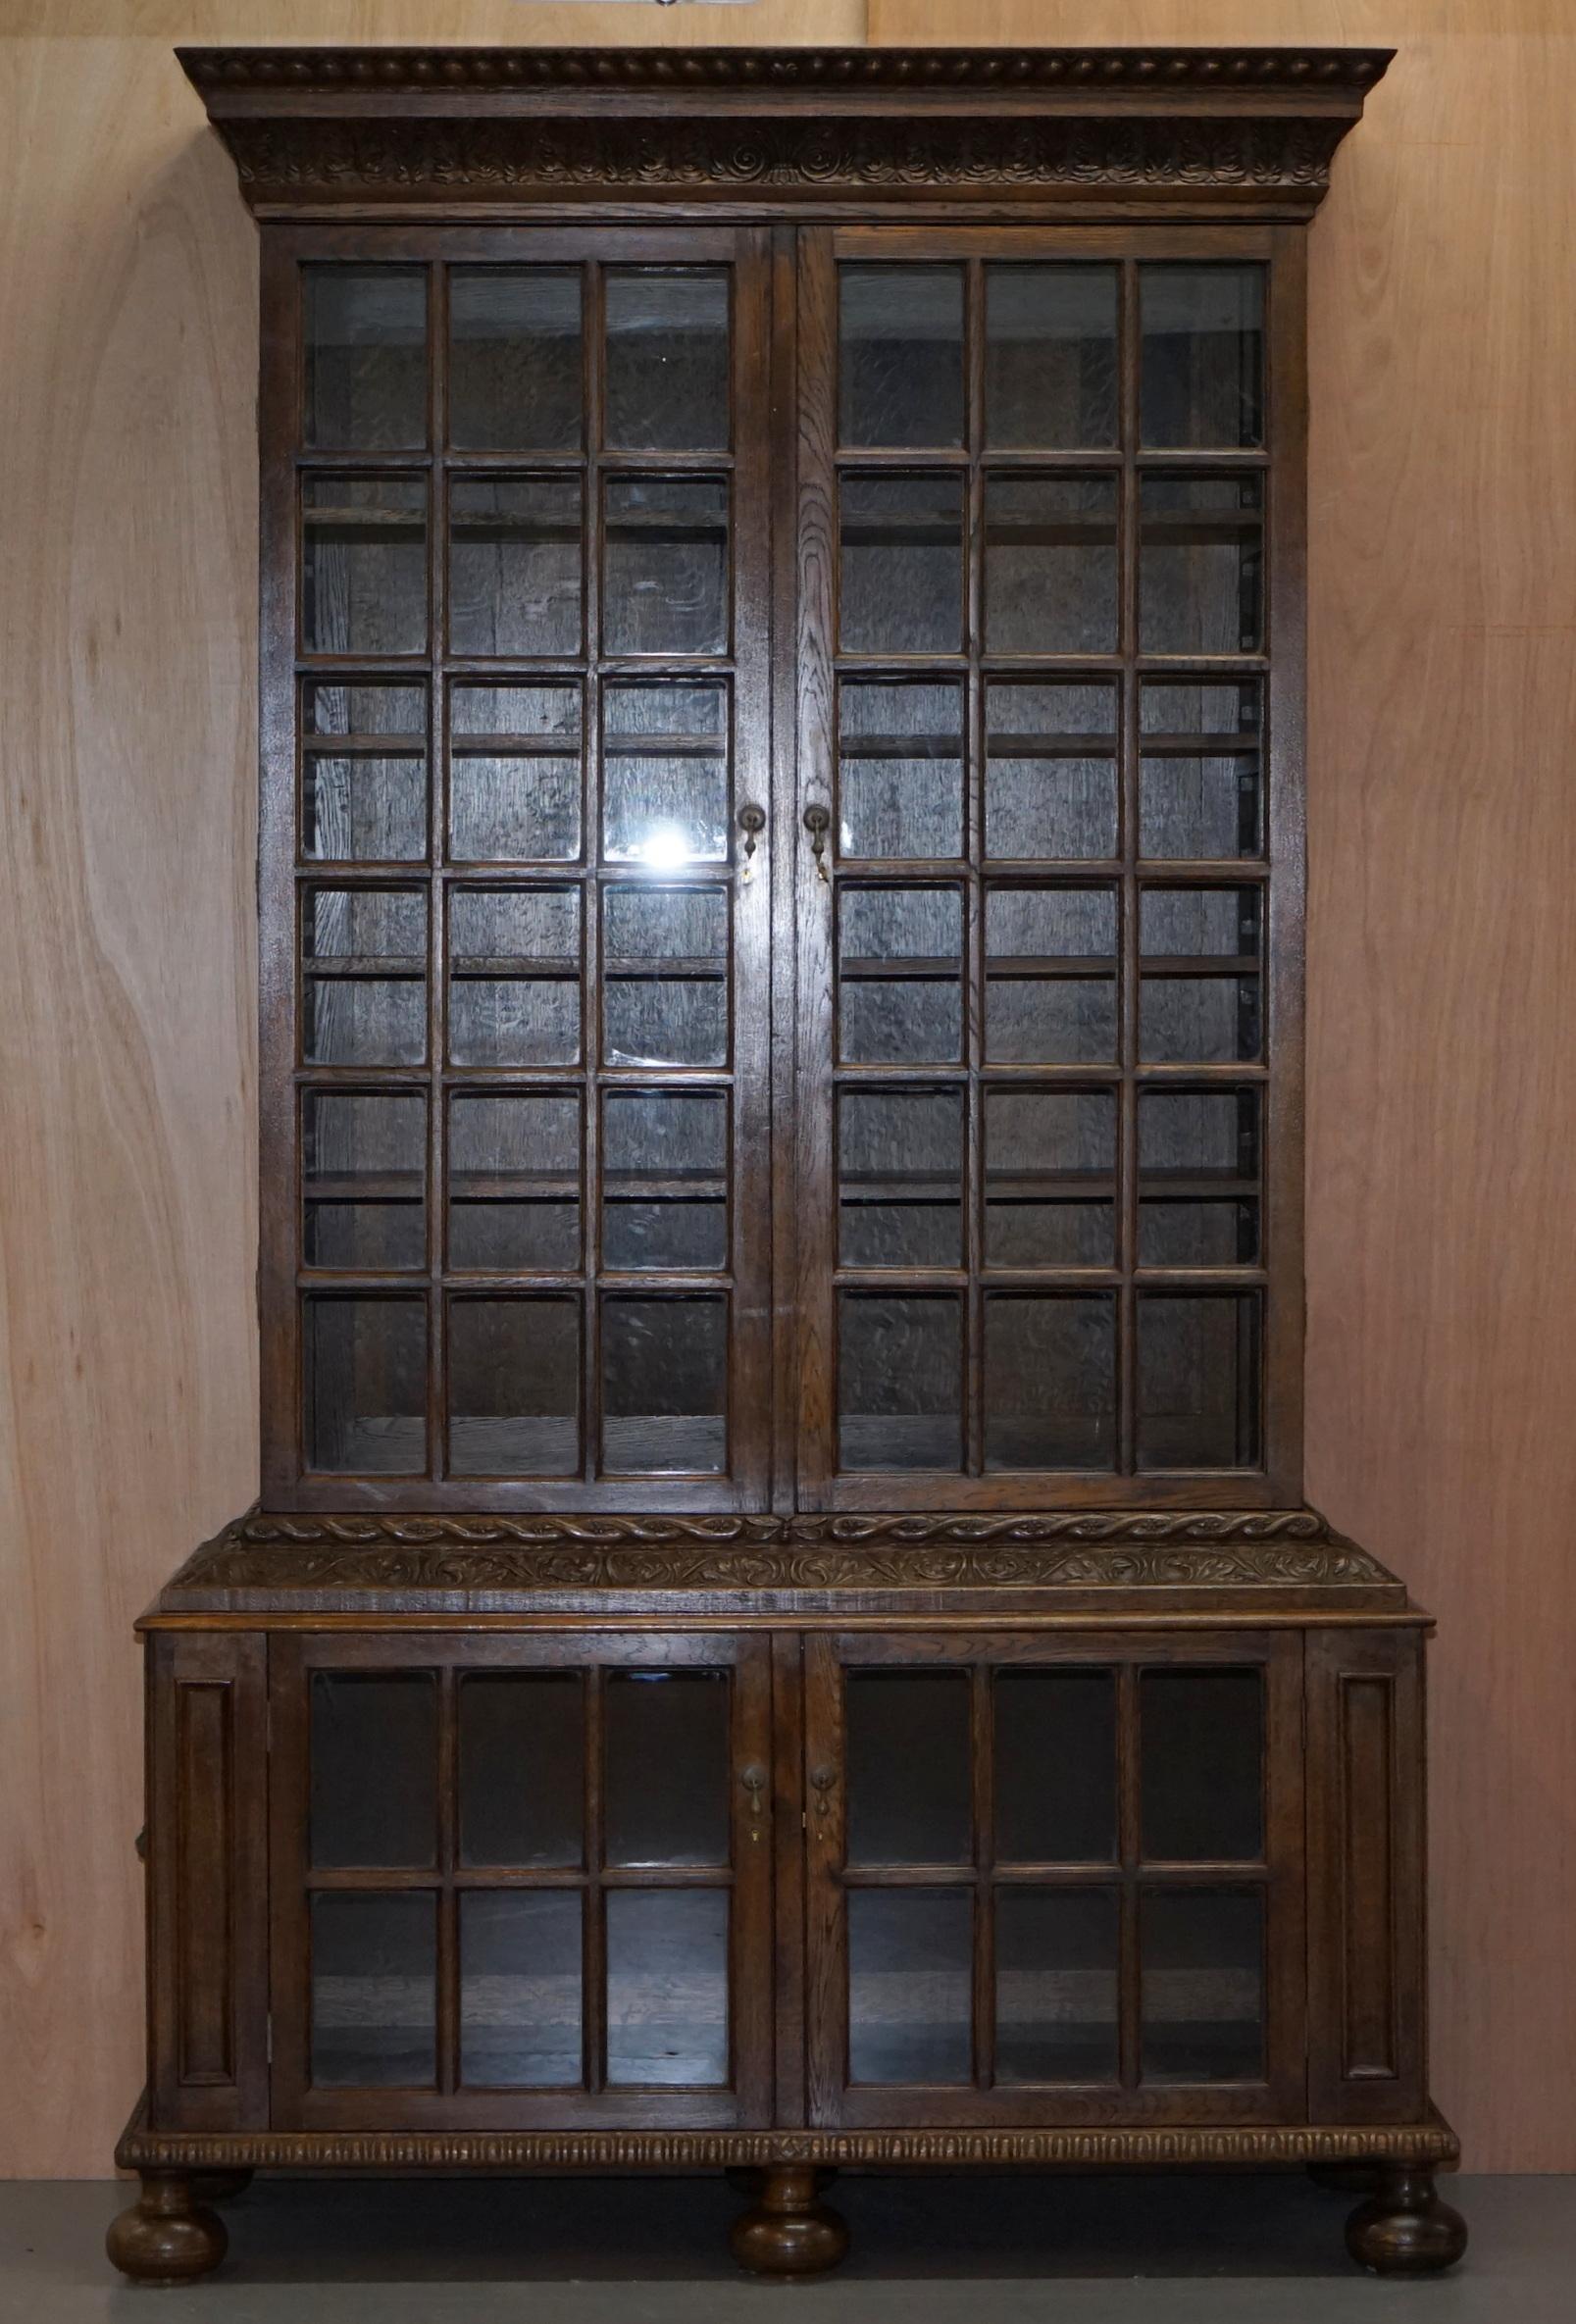 We are delighted to offer for auction this stunning pair of solid oak Samuel Pepy’s library bookcases based on the original design of 1666

These bookcases have high provenance, each one has the history carved to the base, the first says 